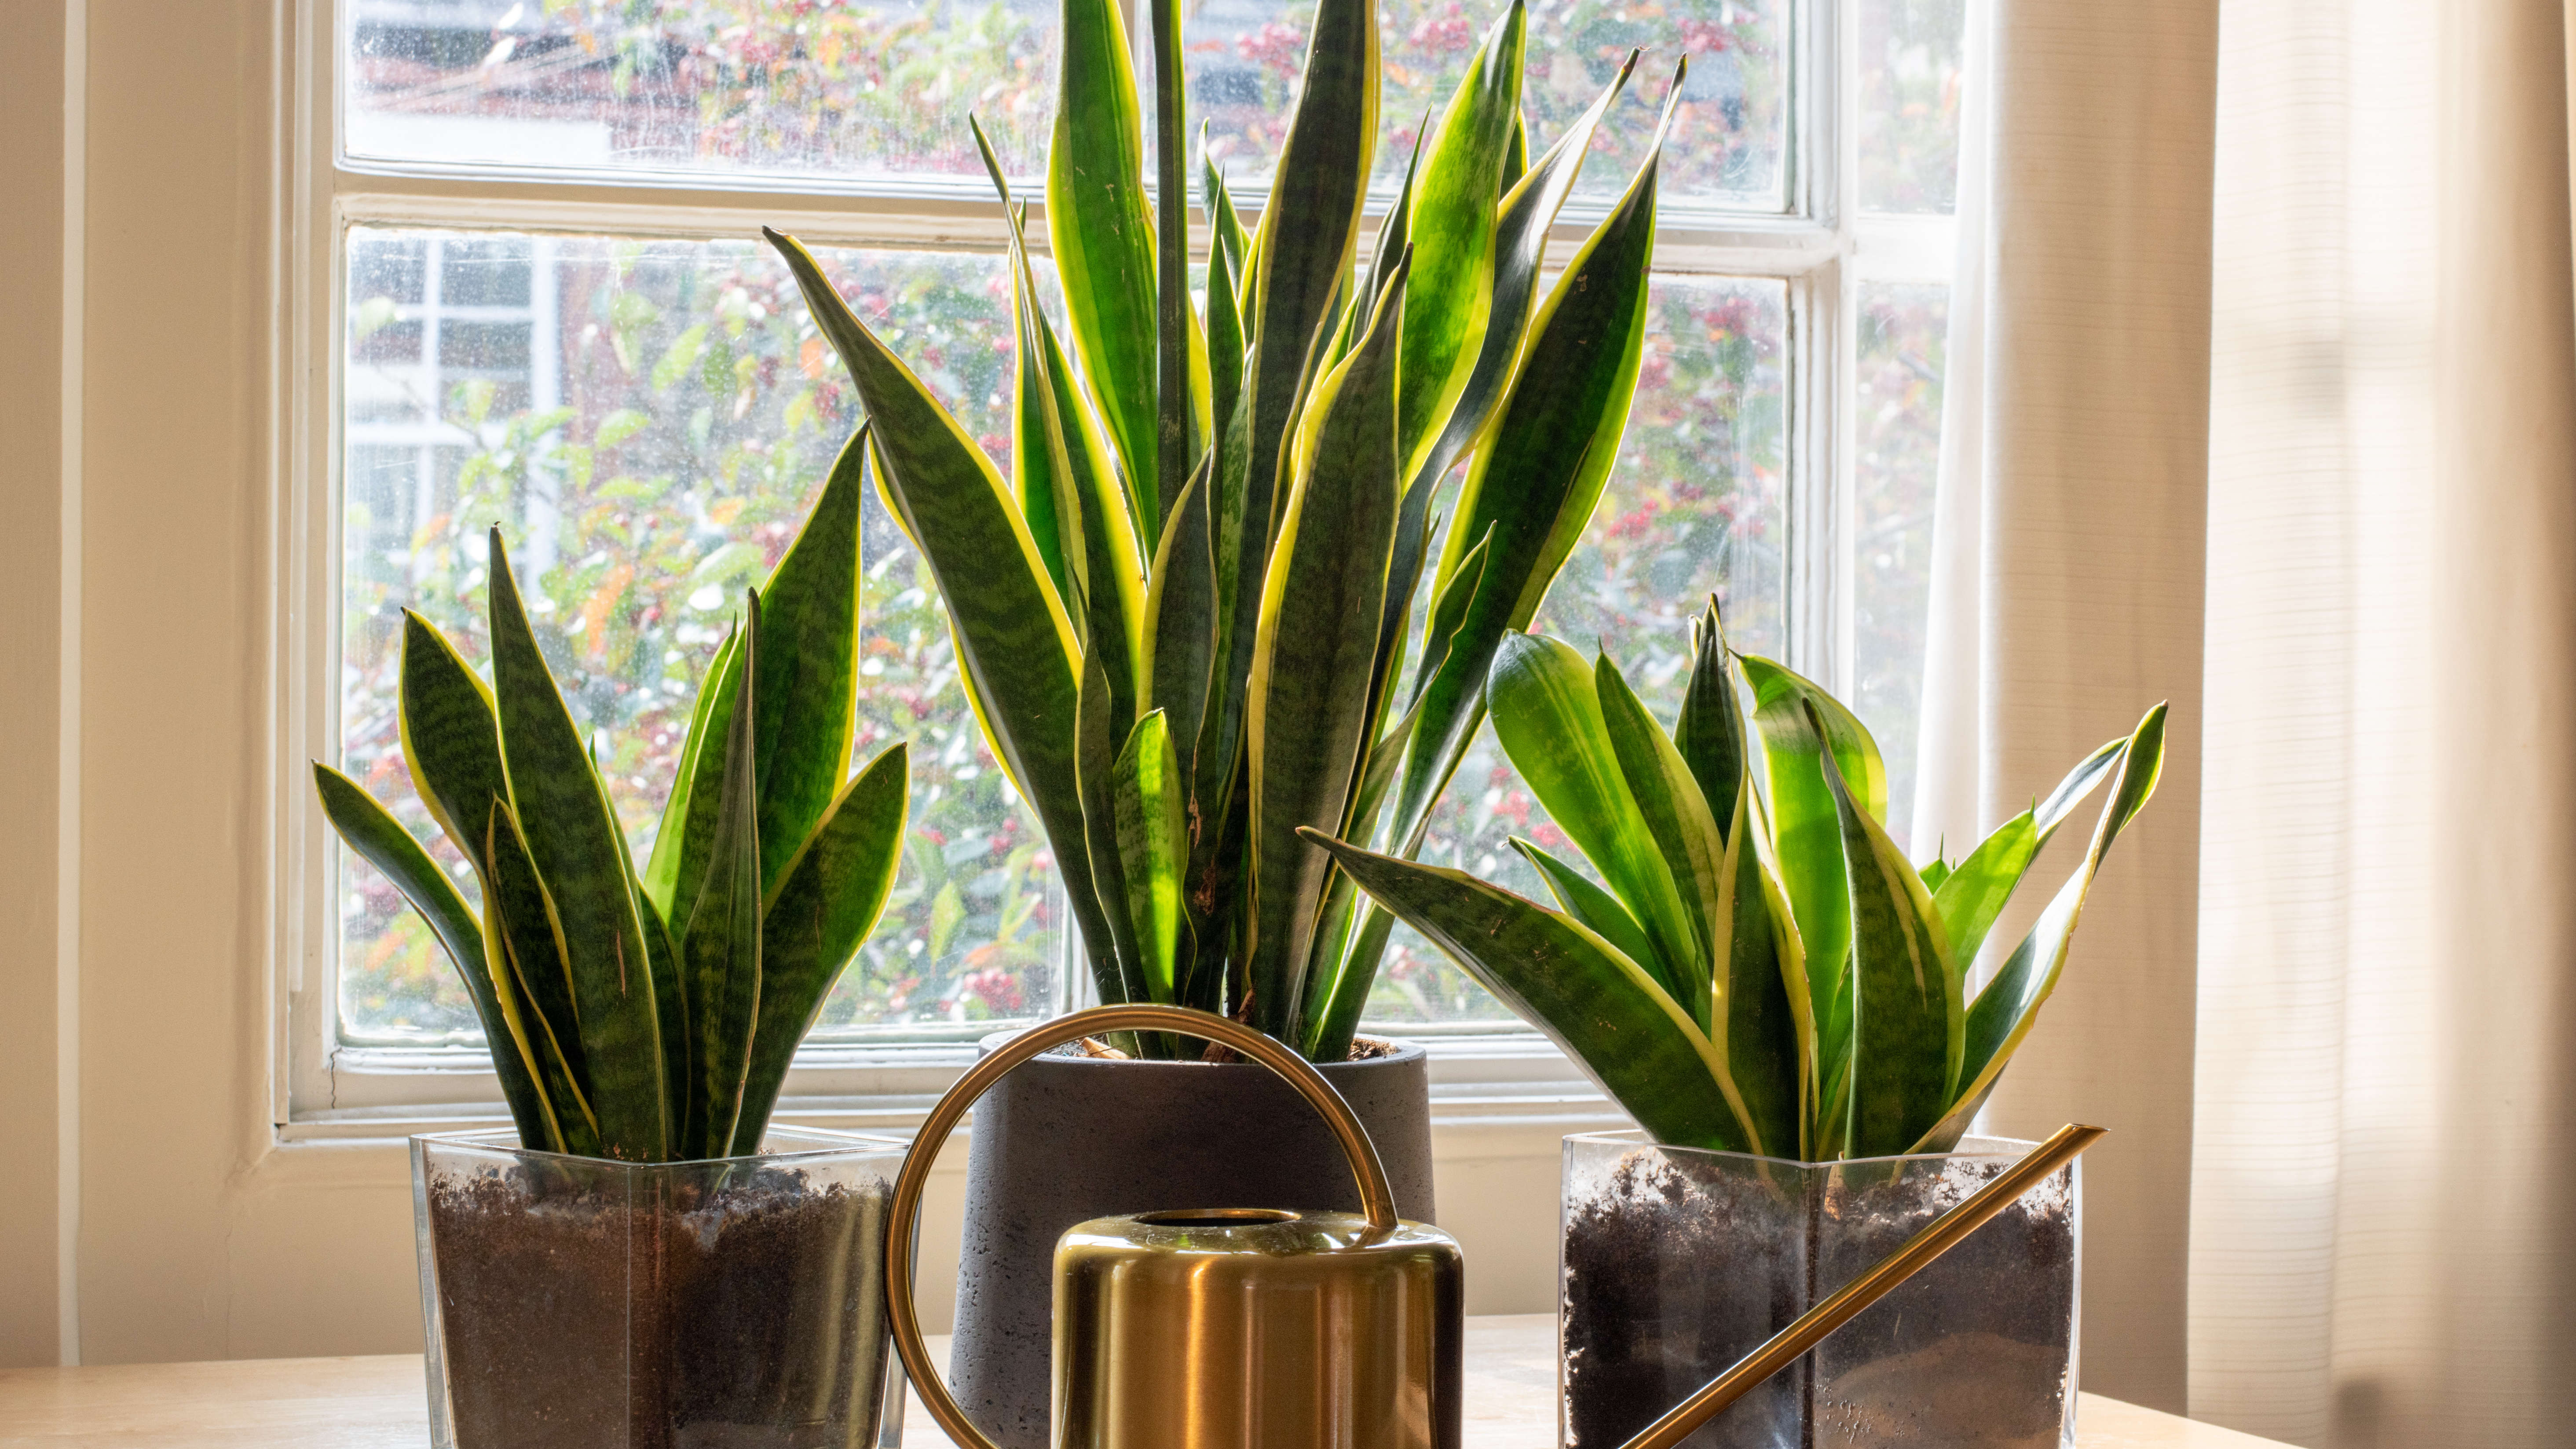 5 best indoor screening plants to protect your privacy | Tom's Guide